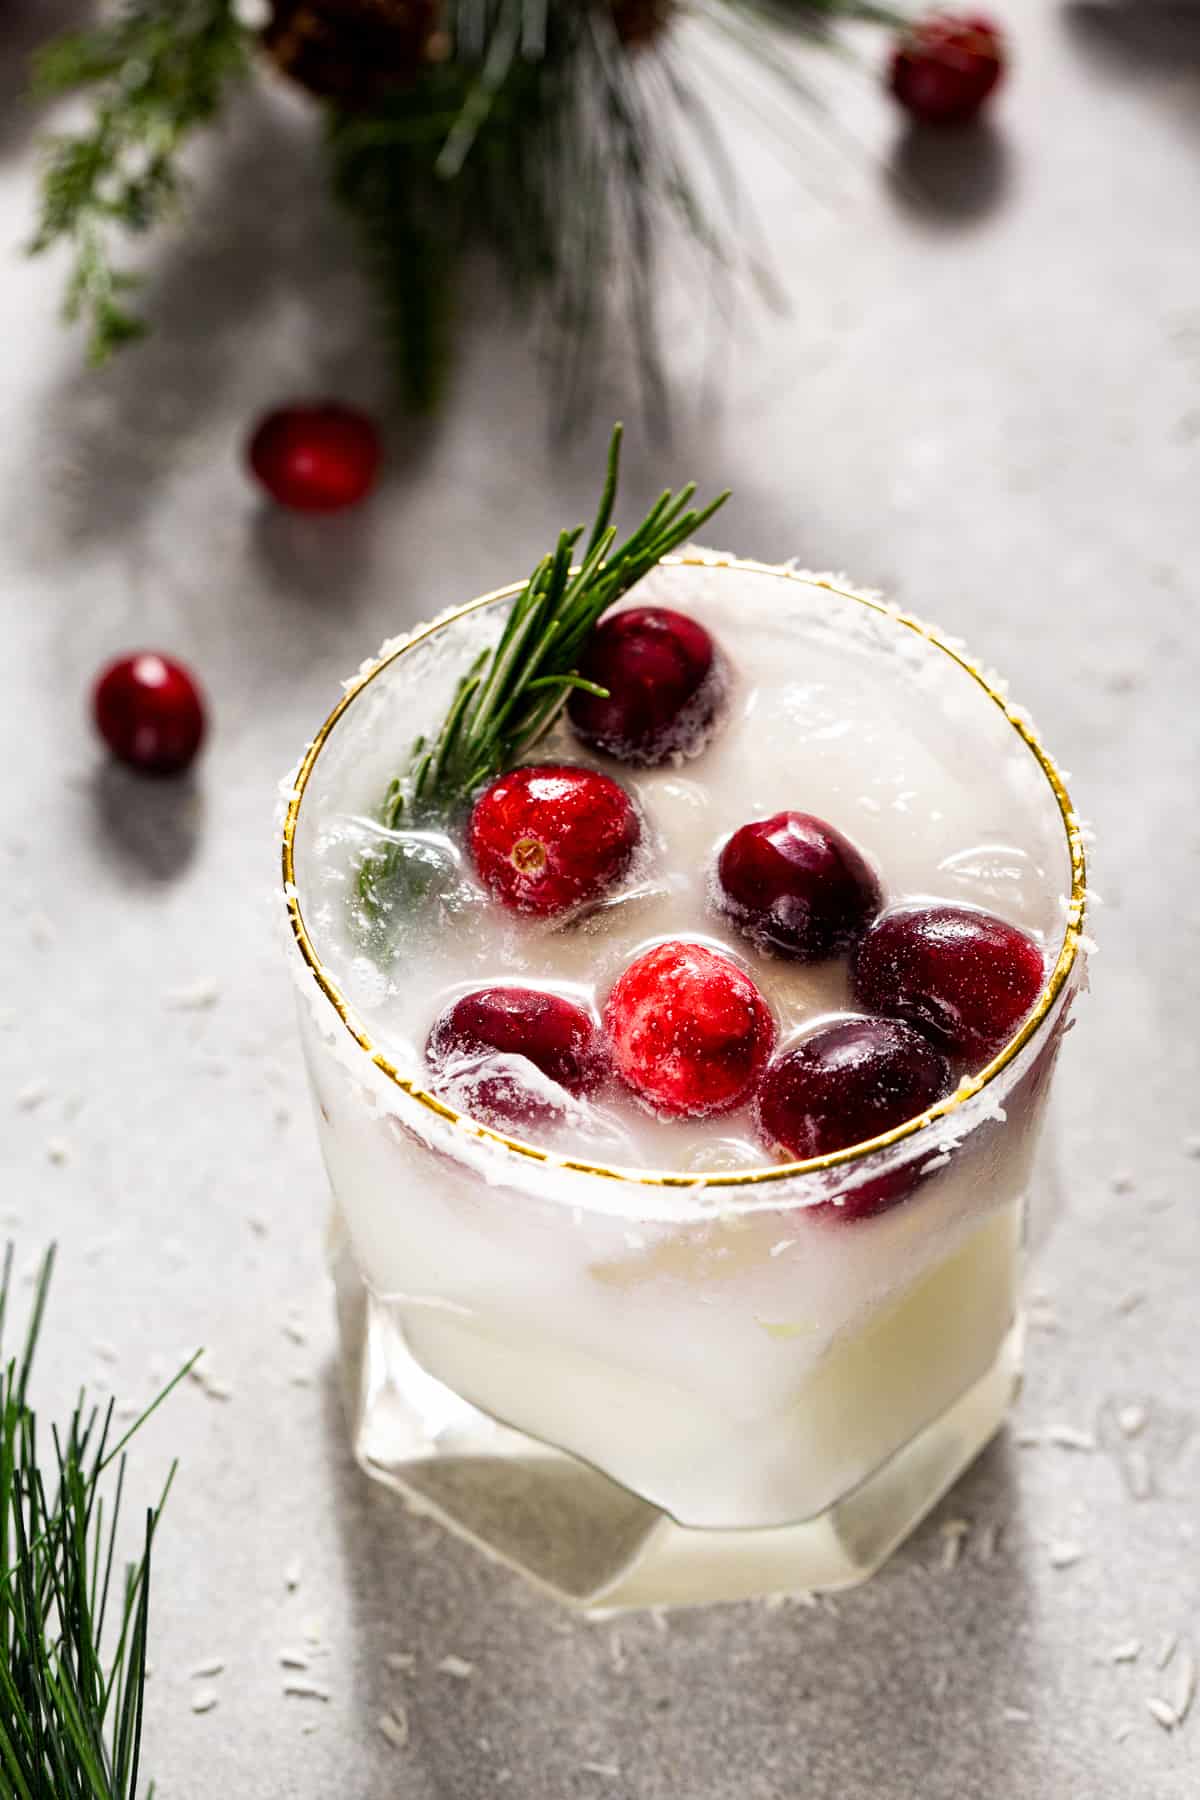 Overhead shot of a White Christmas Margarita, a white colored drink with cranberries and rosemary garnish with a dried coconut rim. The drink is surrounded by fresh cranberries and evergreen sprigs.